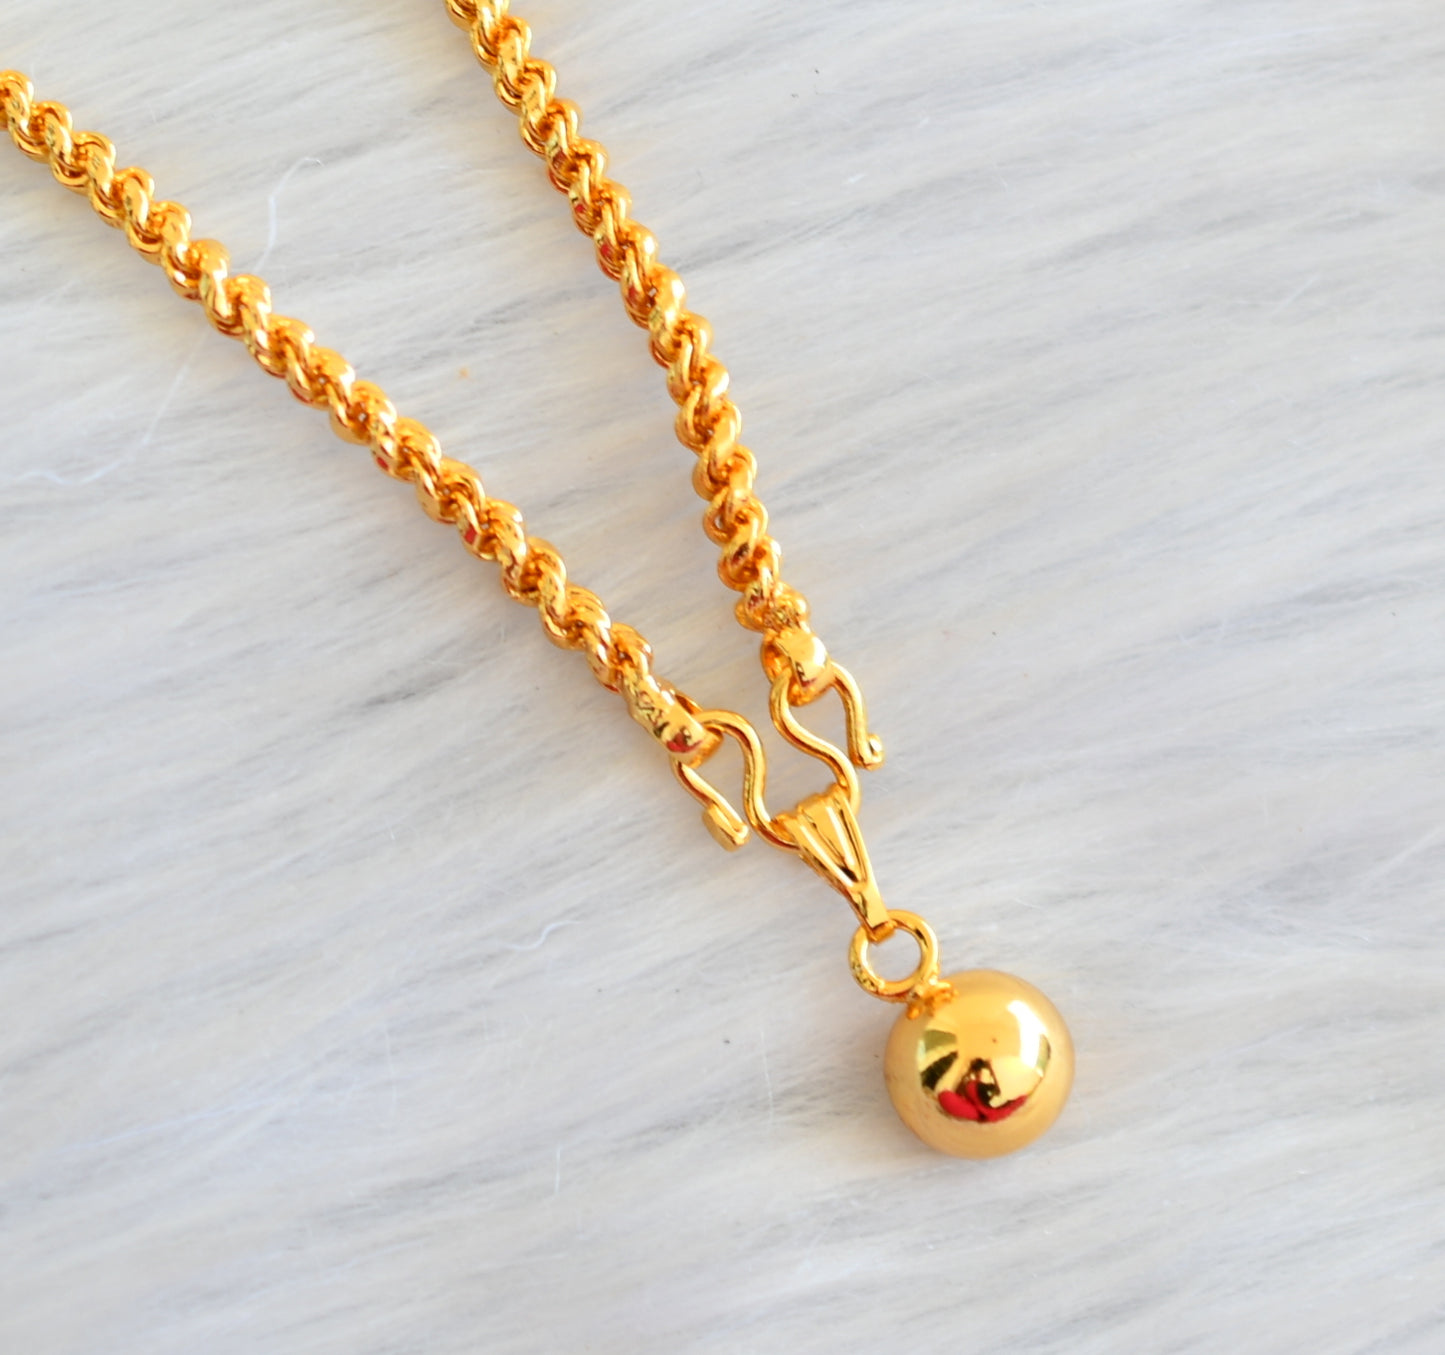 Gold tone rope chain with ball pendant dj-35165